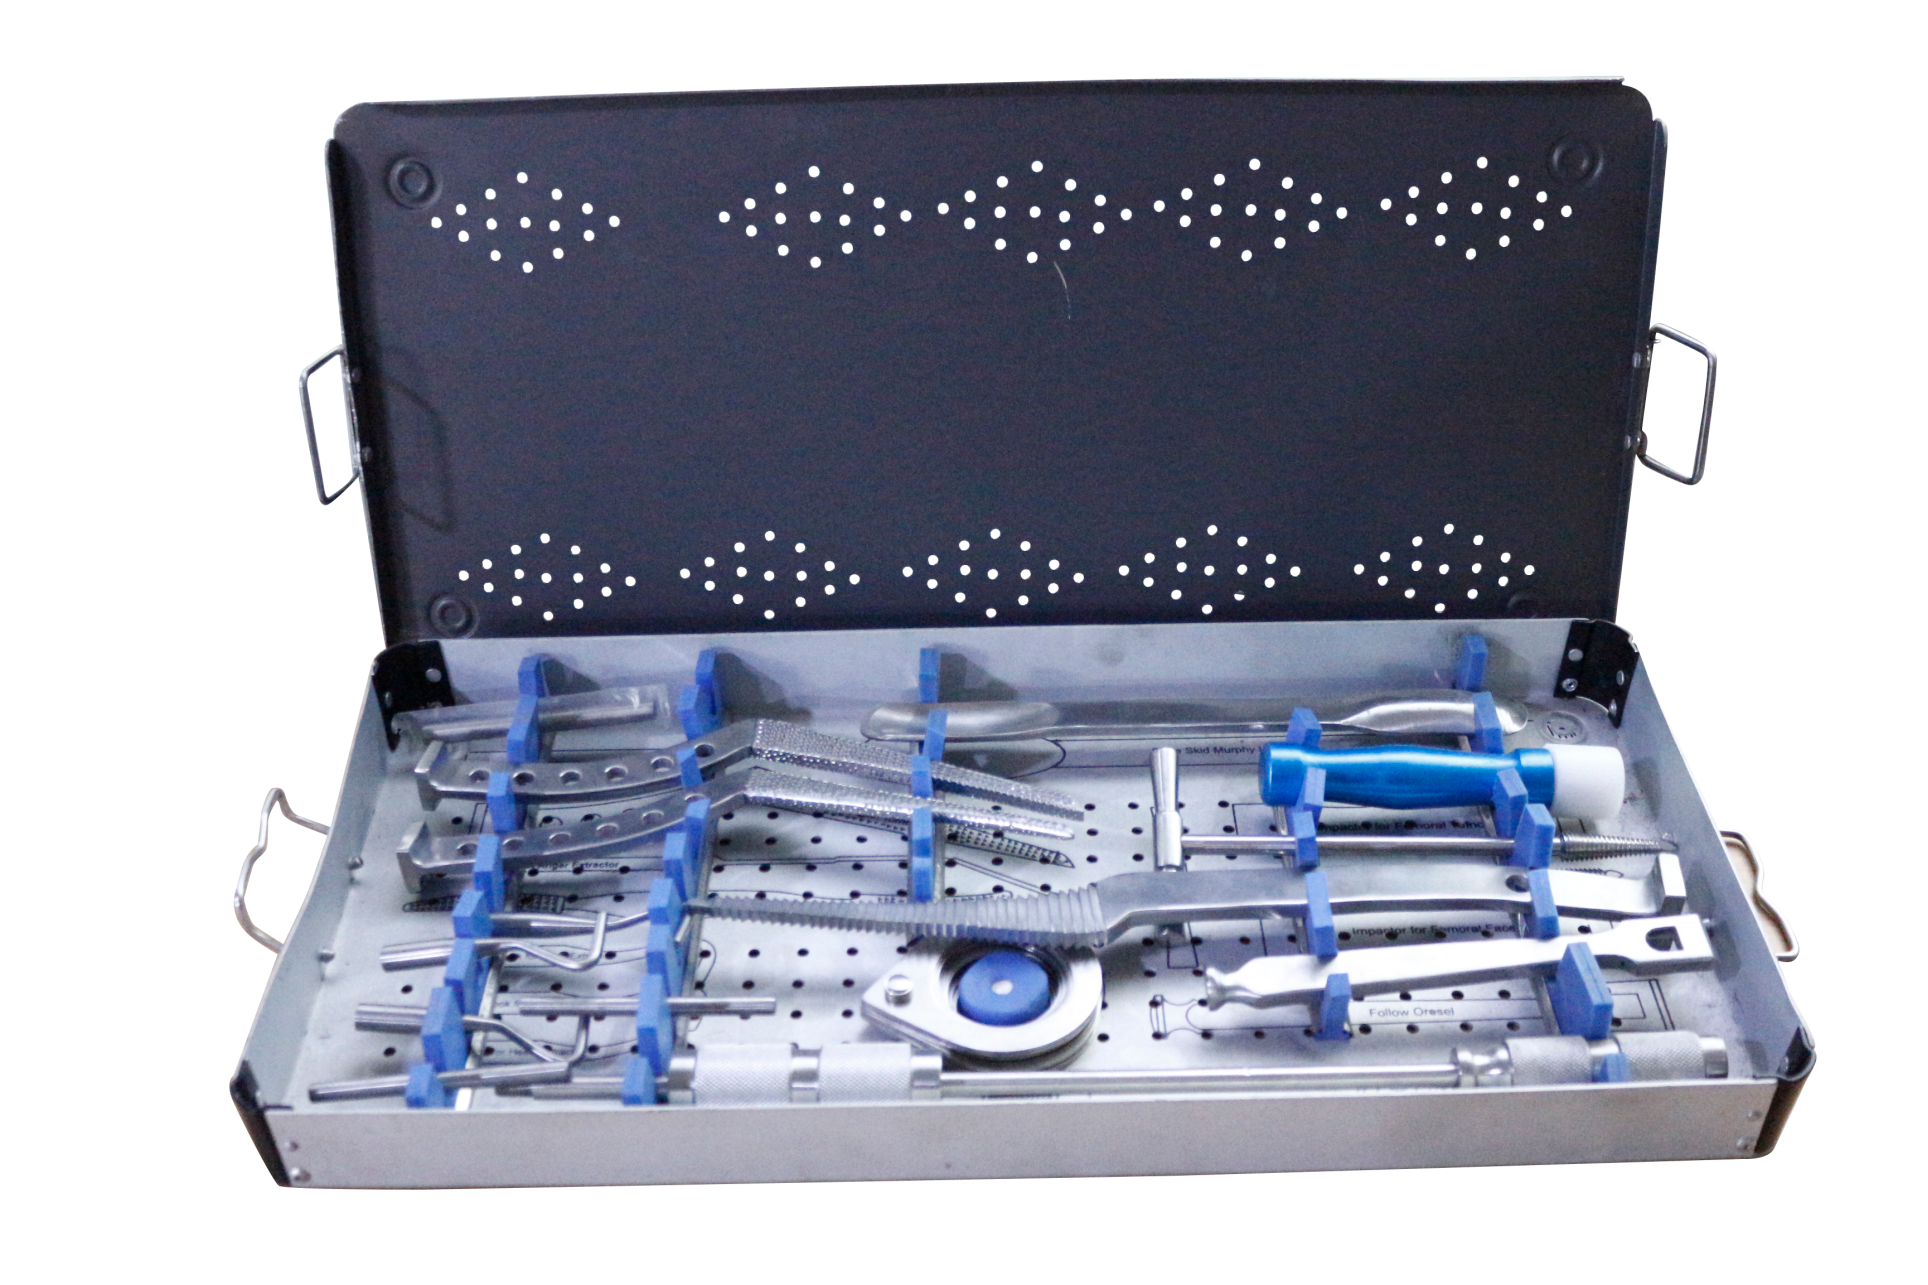 General Orthopedic Implants And Instruments